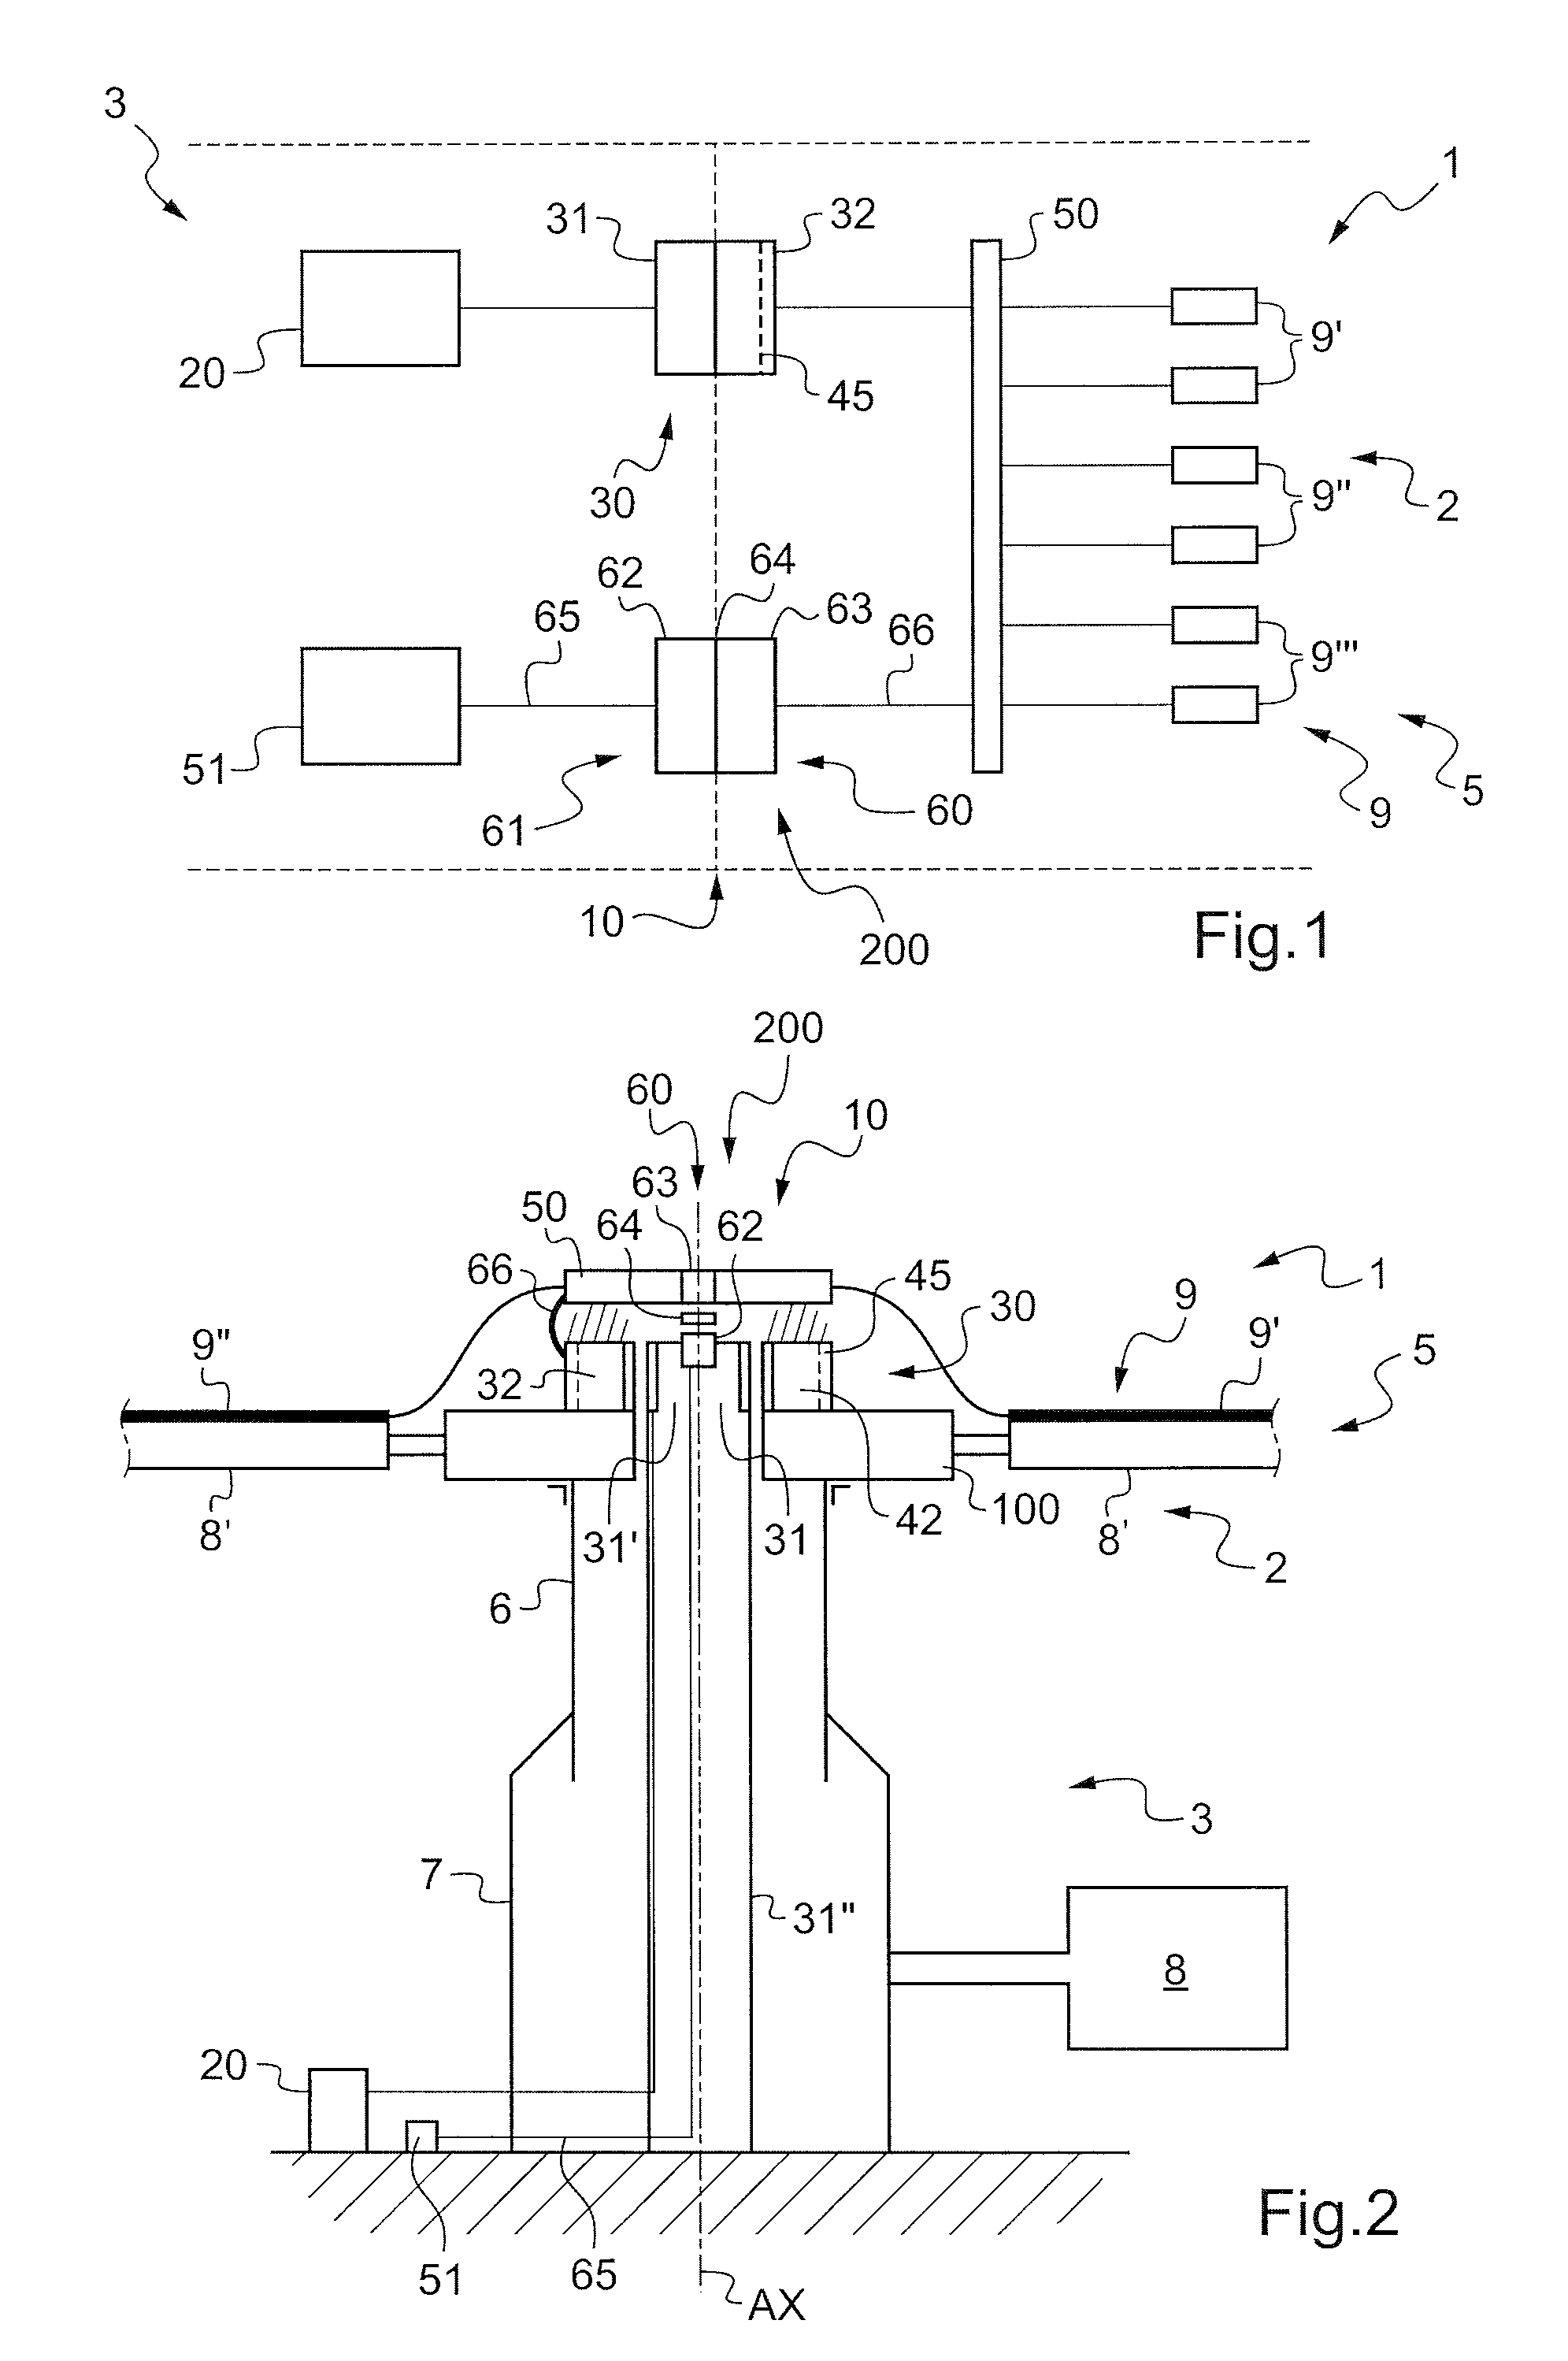 Electrical power supply and control device for equipment of a rotor, and an aircraft fitted with such a device